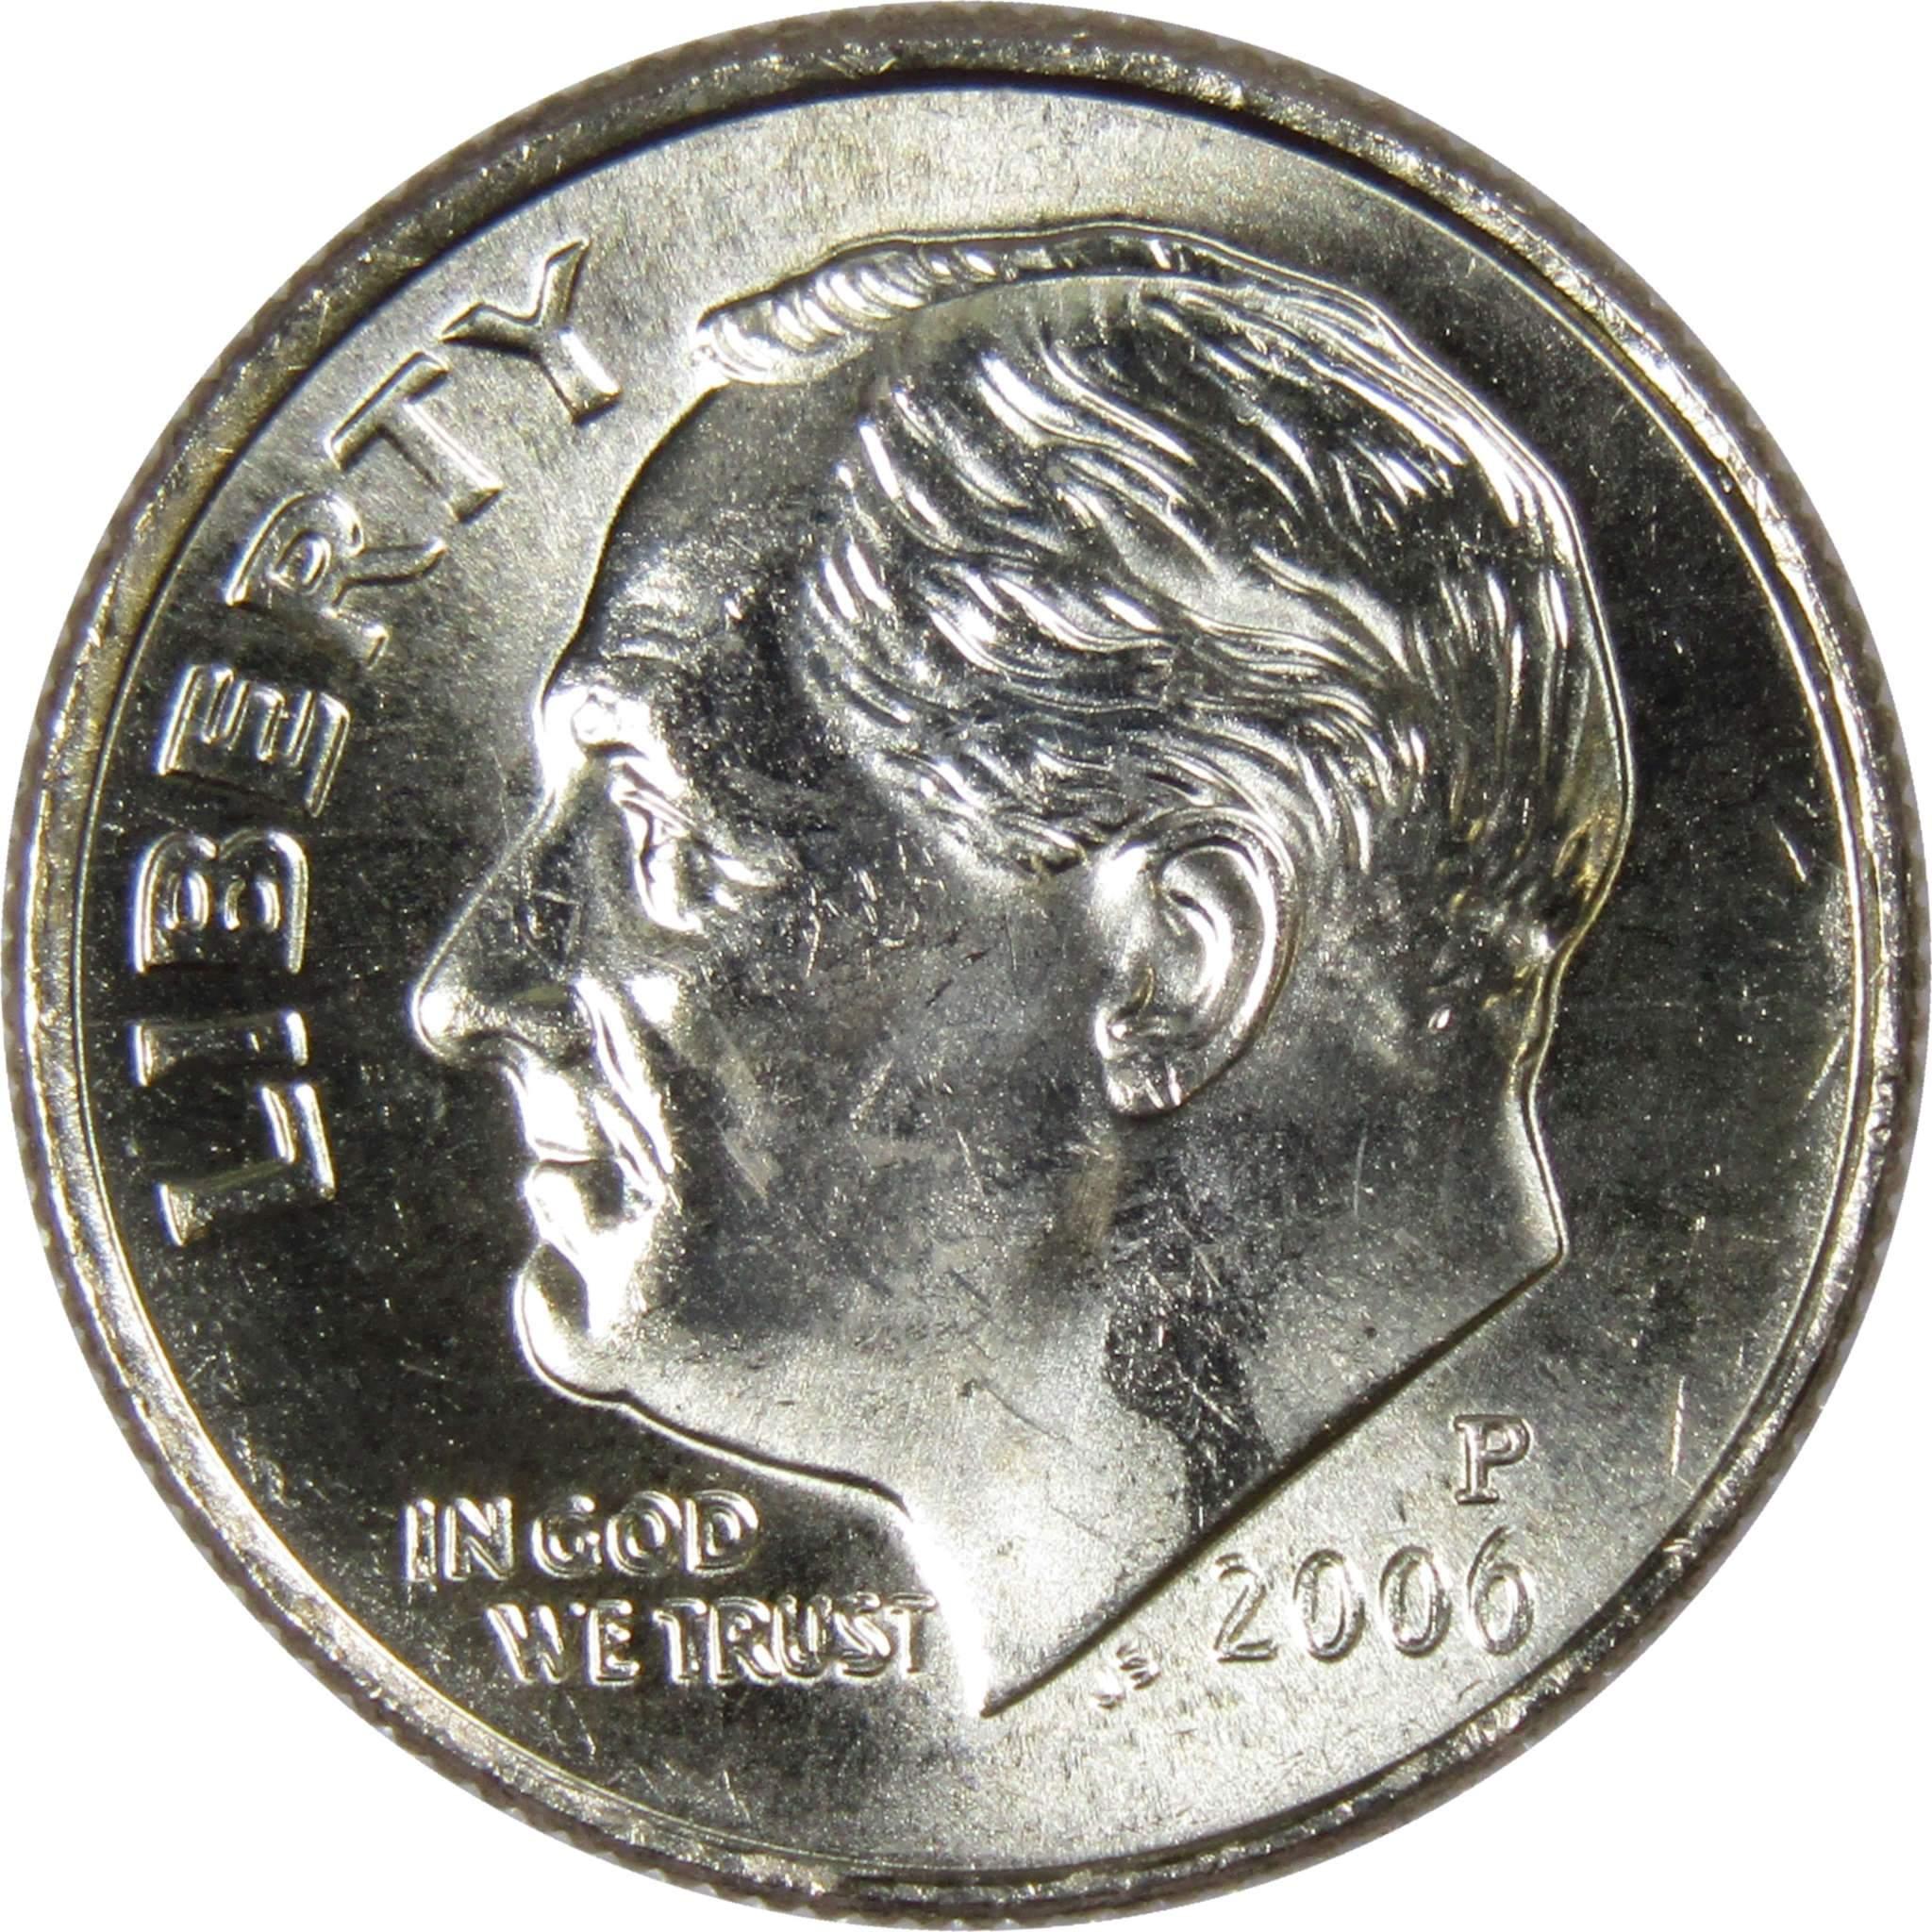 2006 P Roosevelt Dime BU Uncirculated Mint State 10c US Coin Collectible